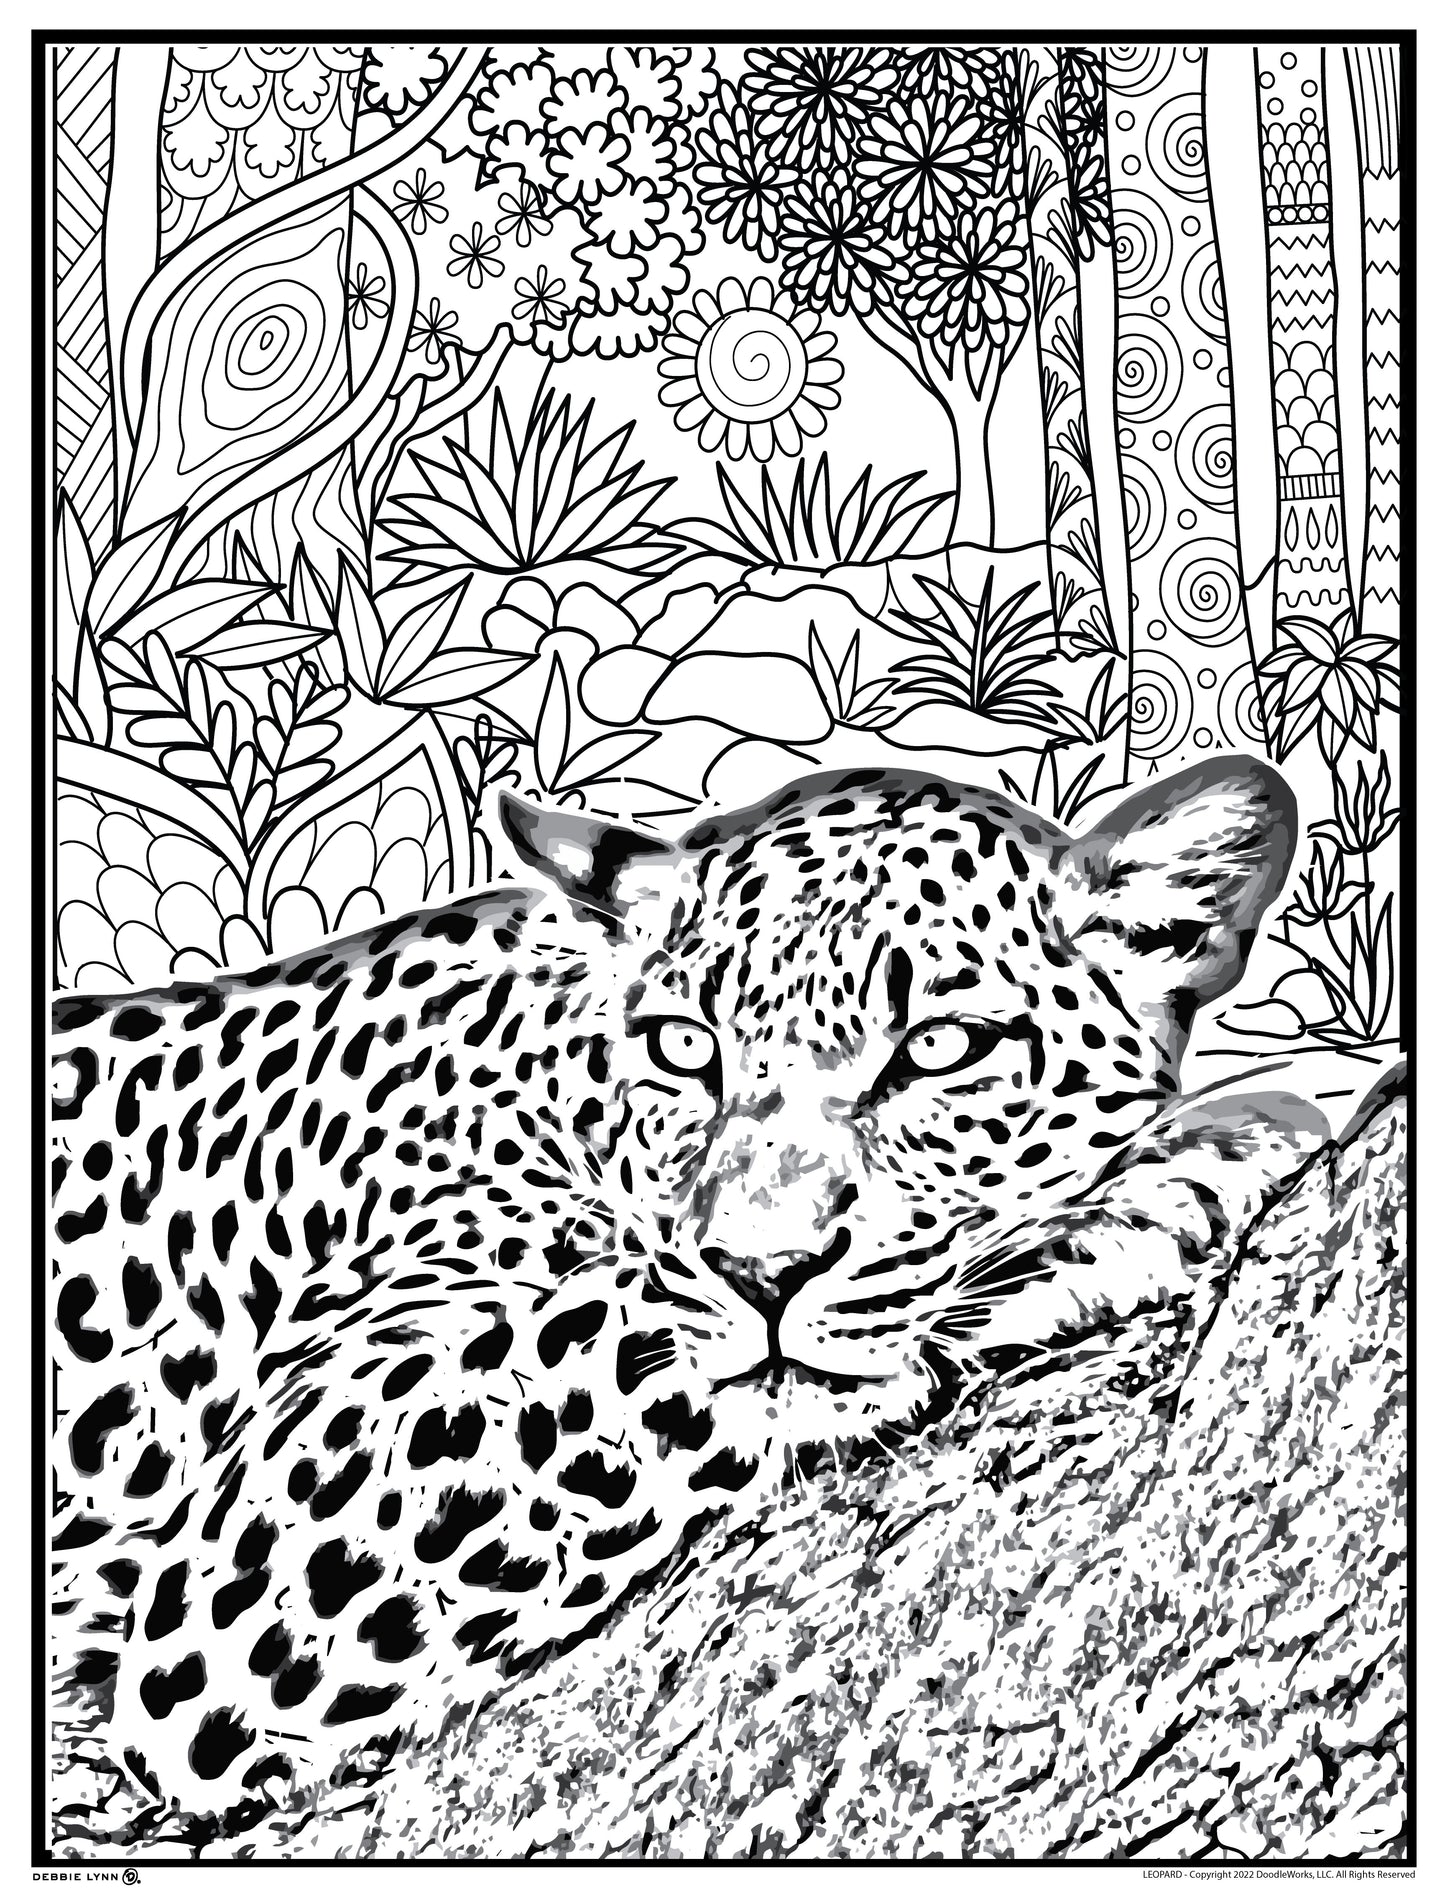 Leopard Personalized Giant Coloring Poster 46"x60"